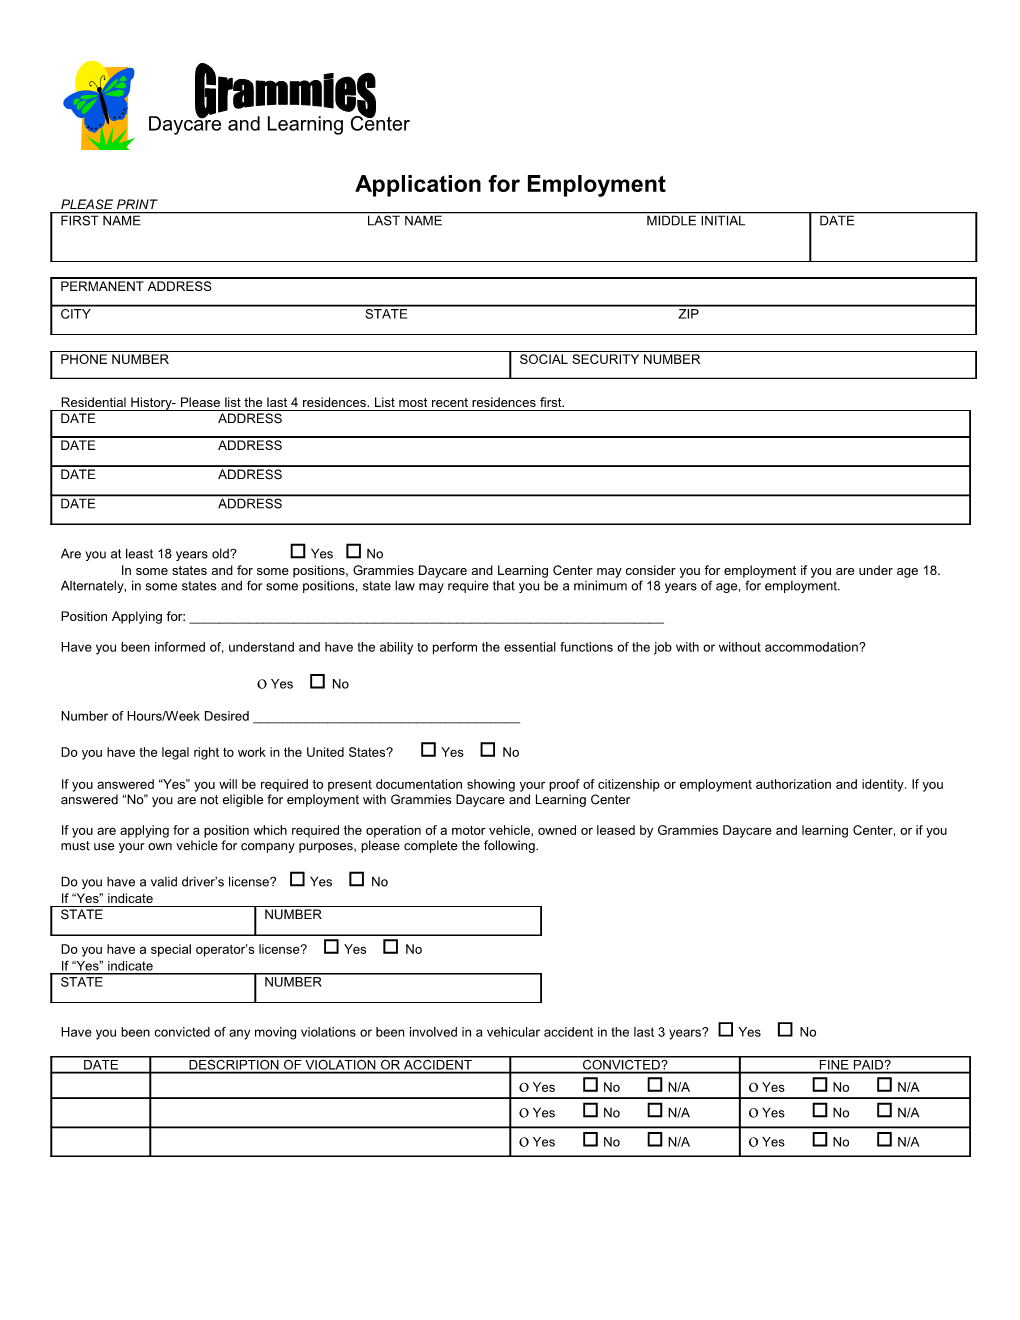 Application for Employment s18